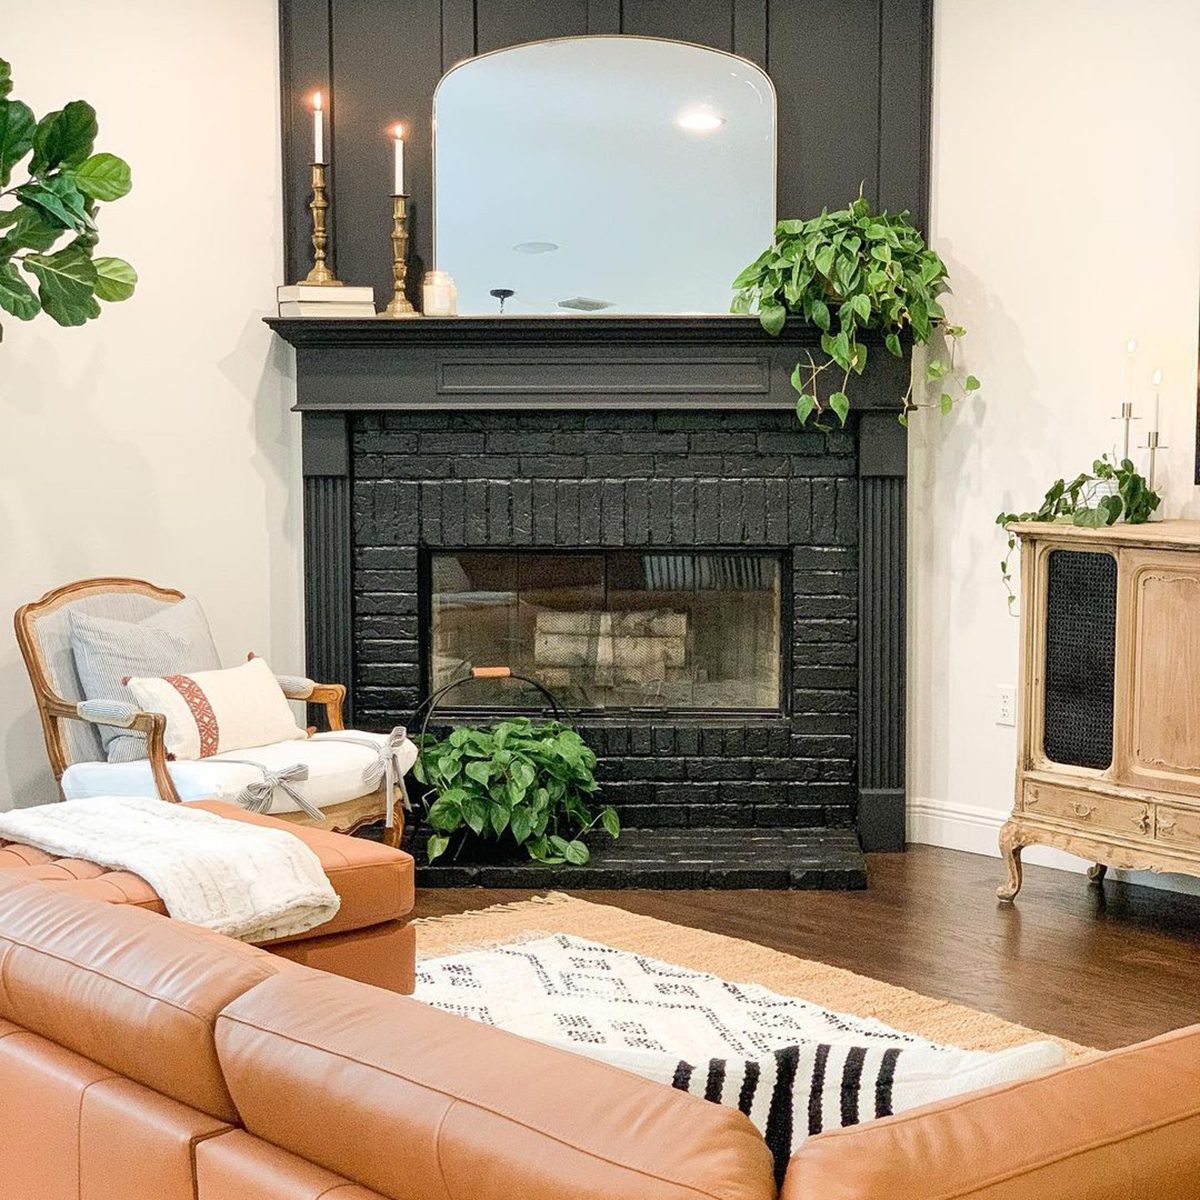 8 Ideas For Painting A Fireplace Classic Black Courtesy @thefinishedproject Instagram